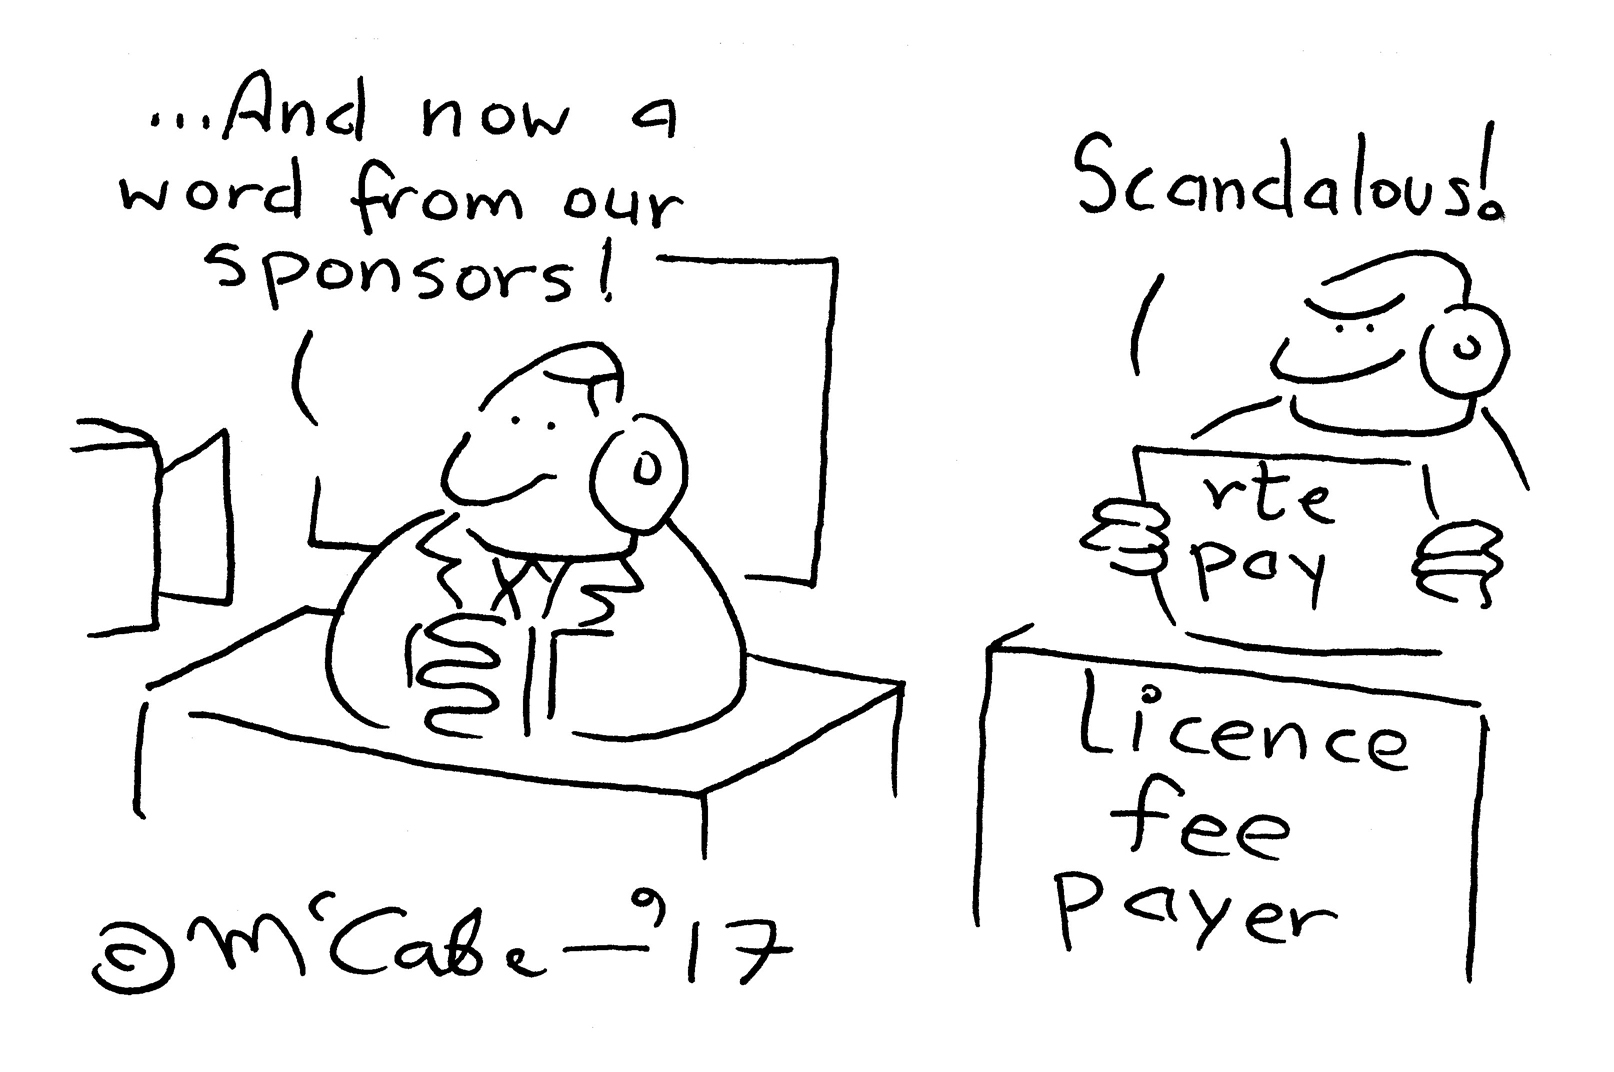 McCabe - licence fee payer